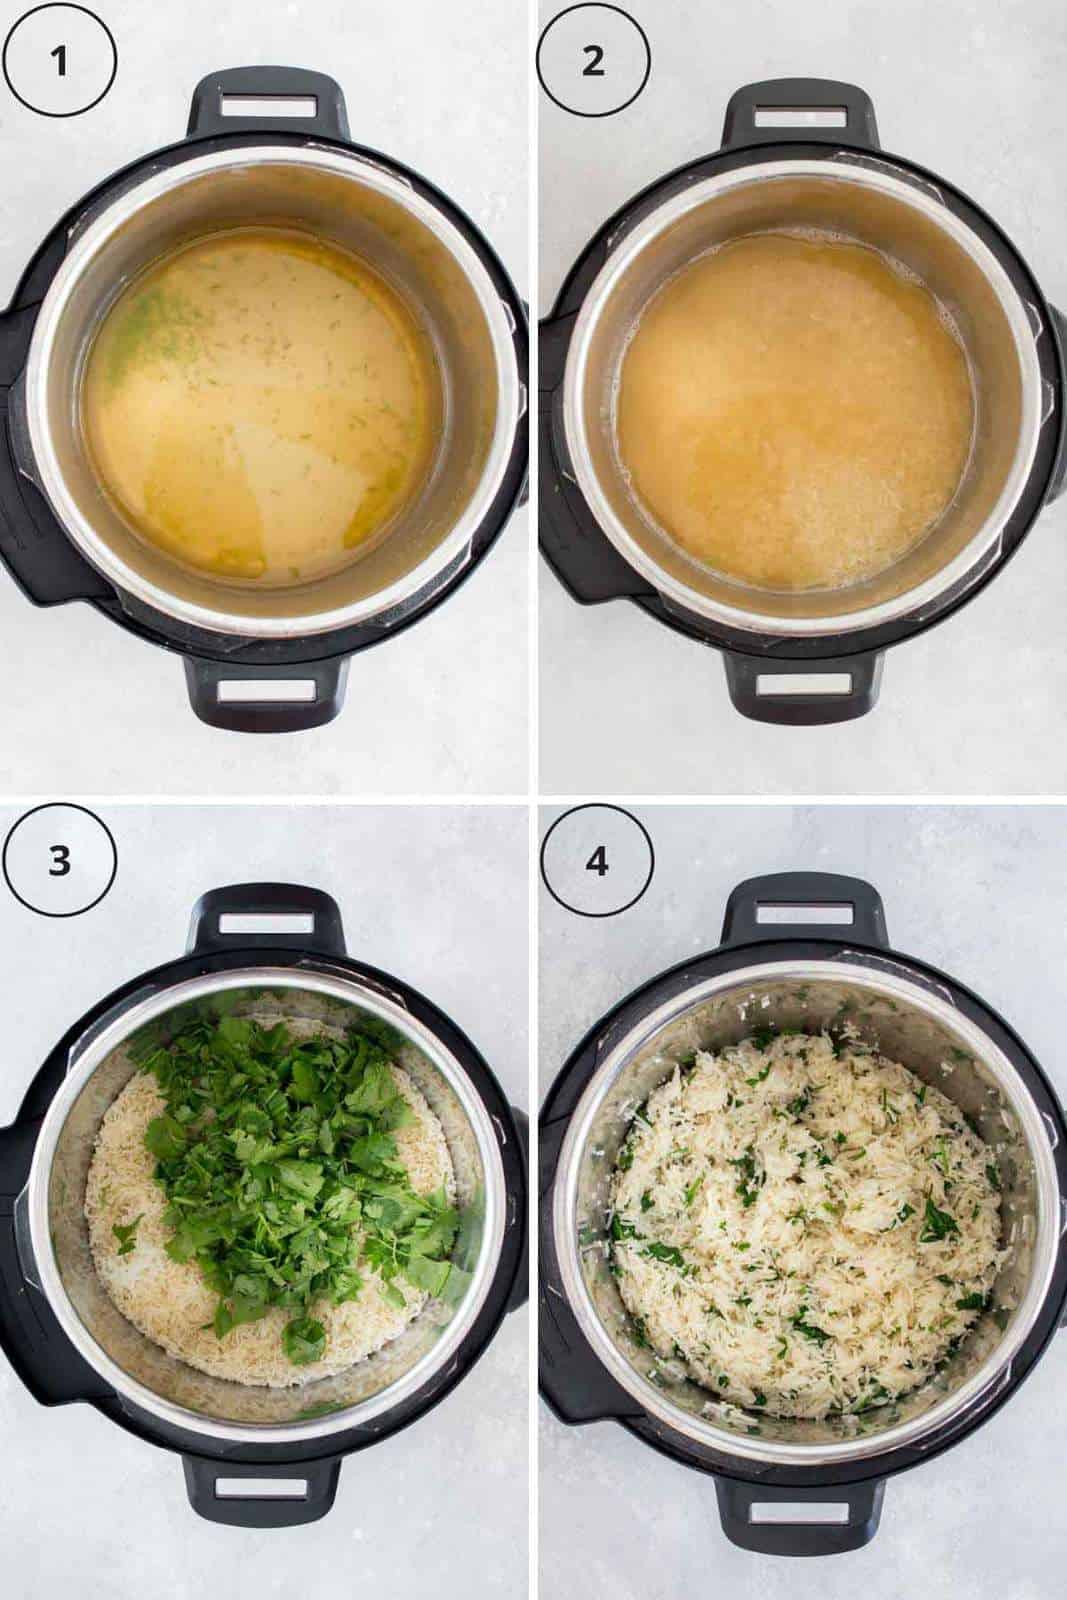 Set of four photos showing how to make cilantro lime rice.